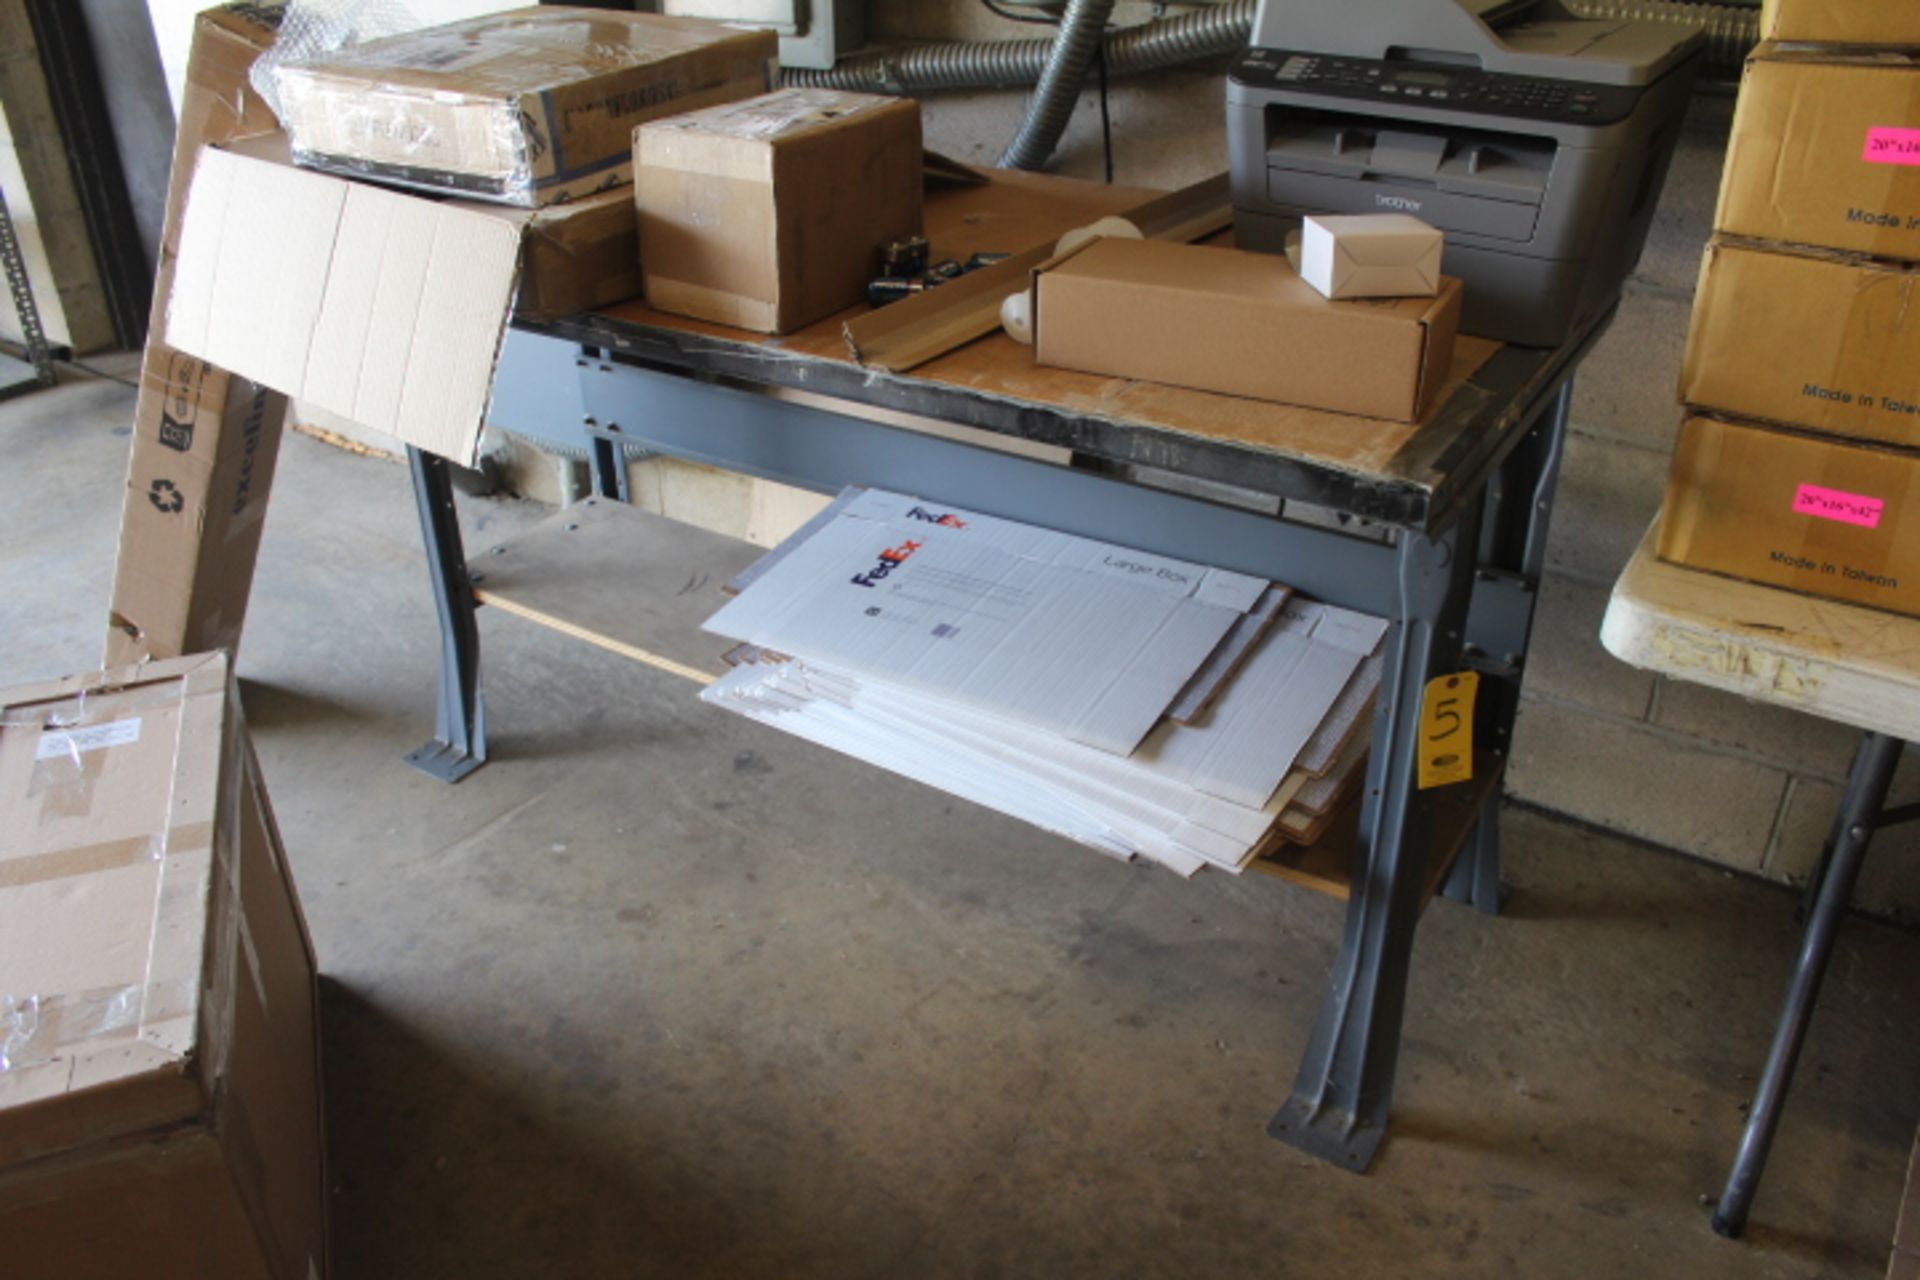 30 IN. X 5 FT. STEEL SHIPPING DESK, (CONTENTS NOT INCLUDED)